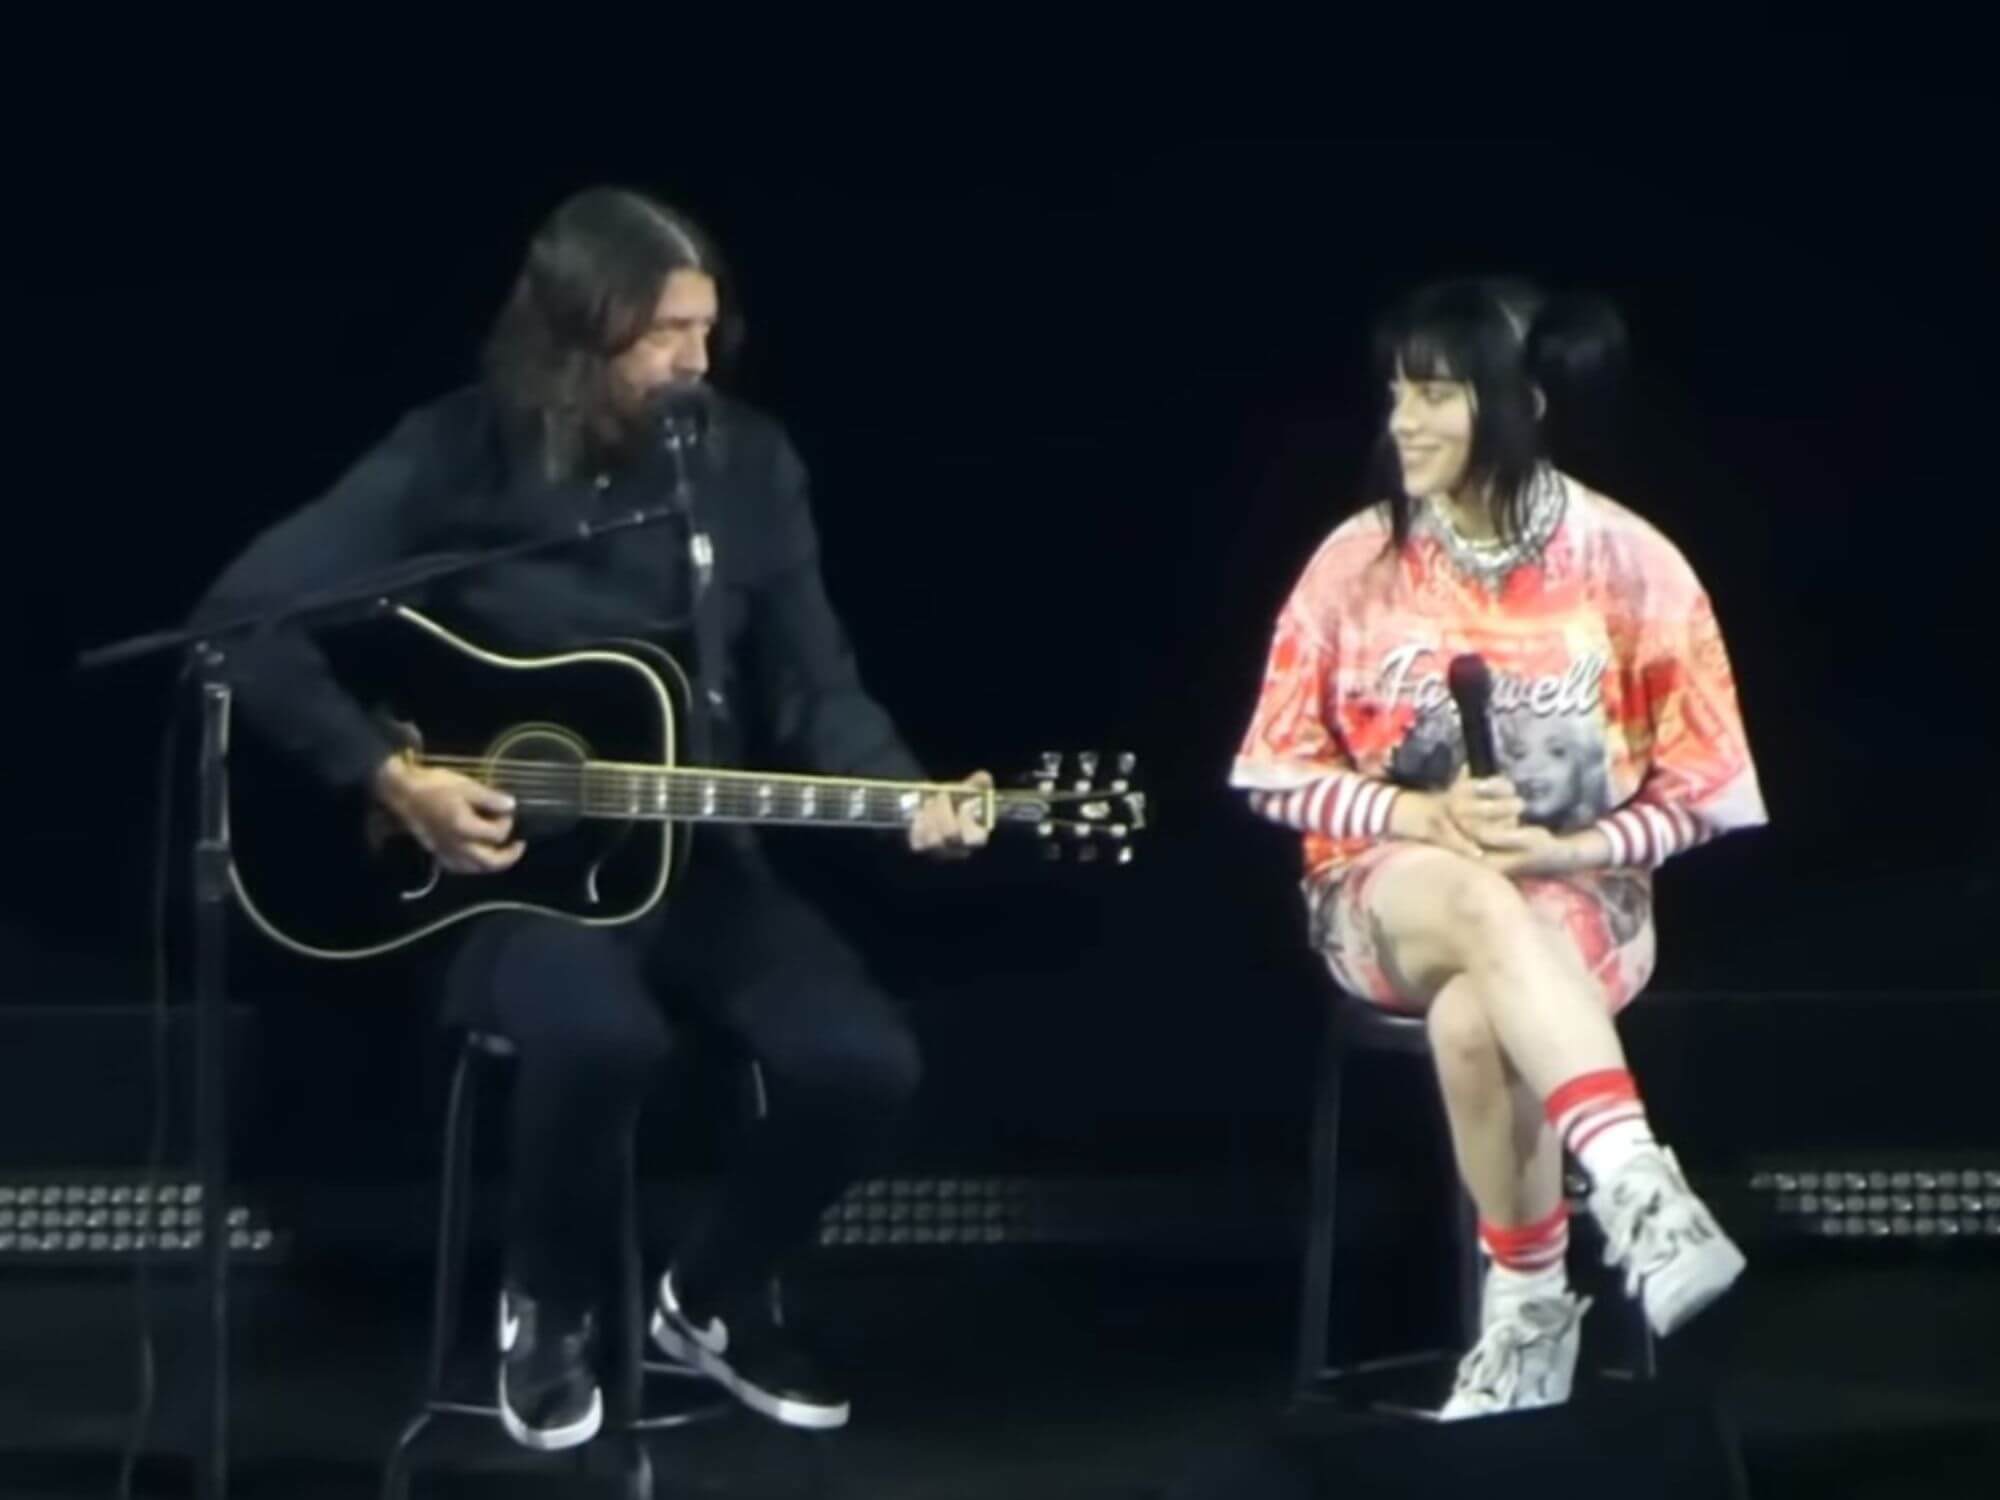 Billie Eilish collaboration with Dave Grohl